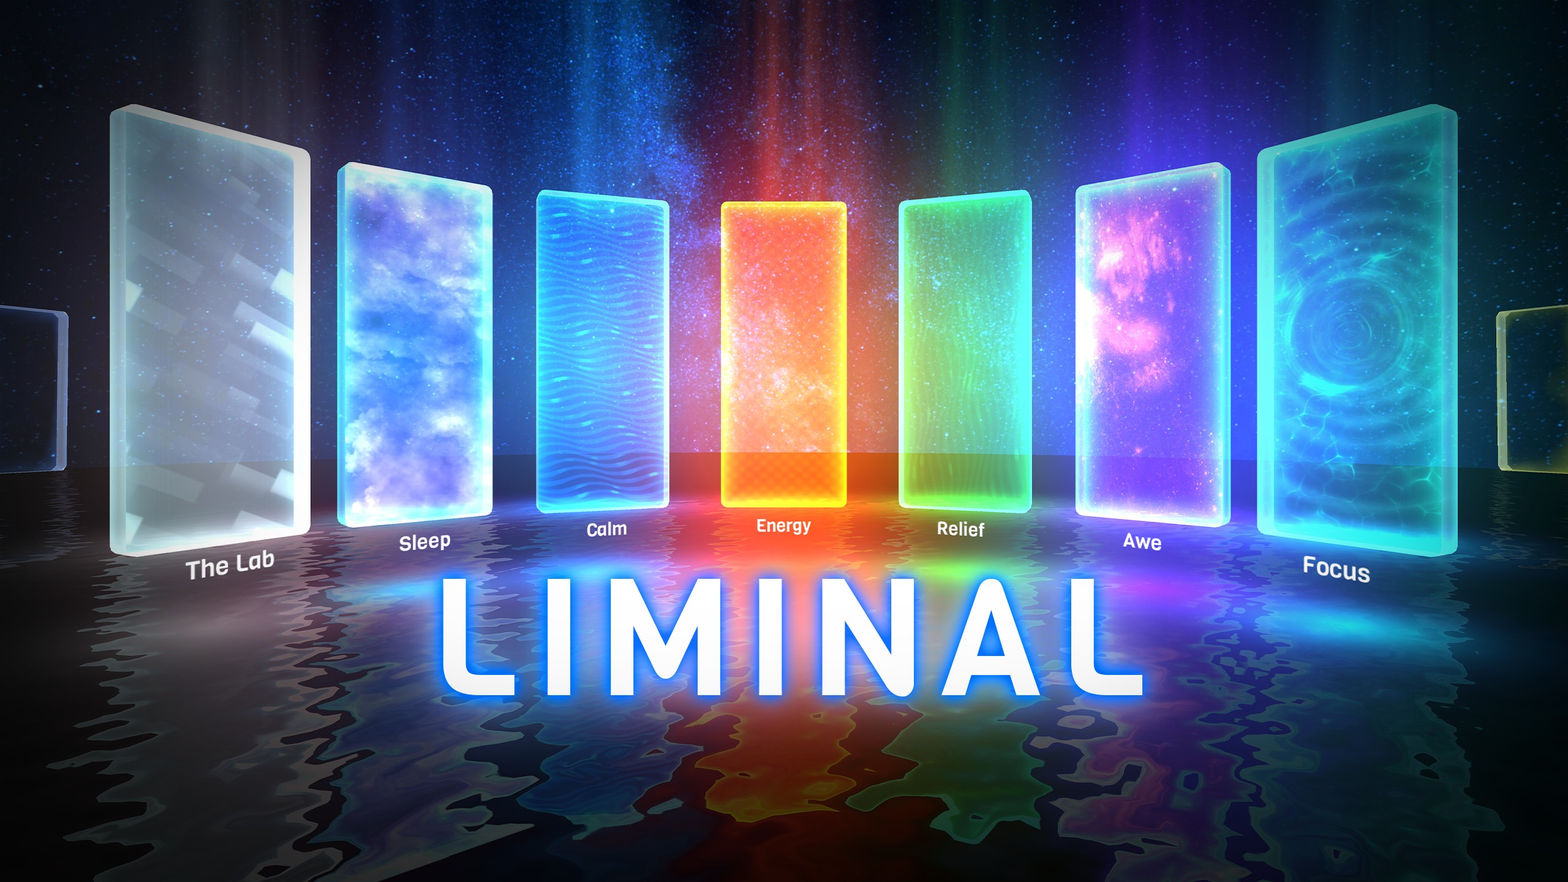 Liminal - Relax. Unwind. Engage. Explore.